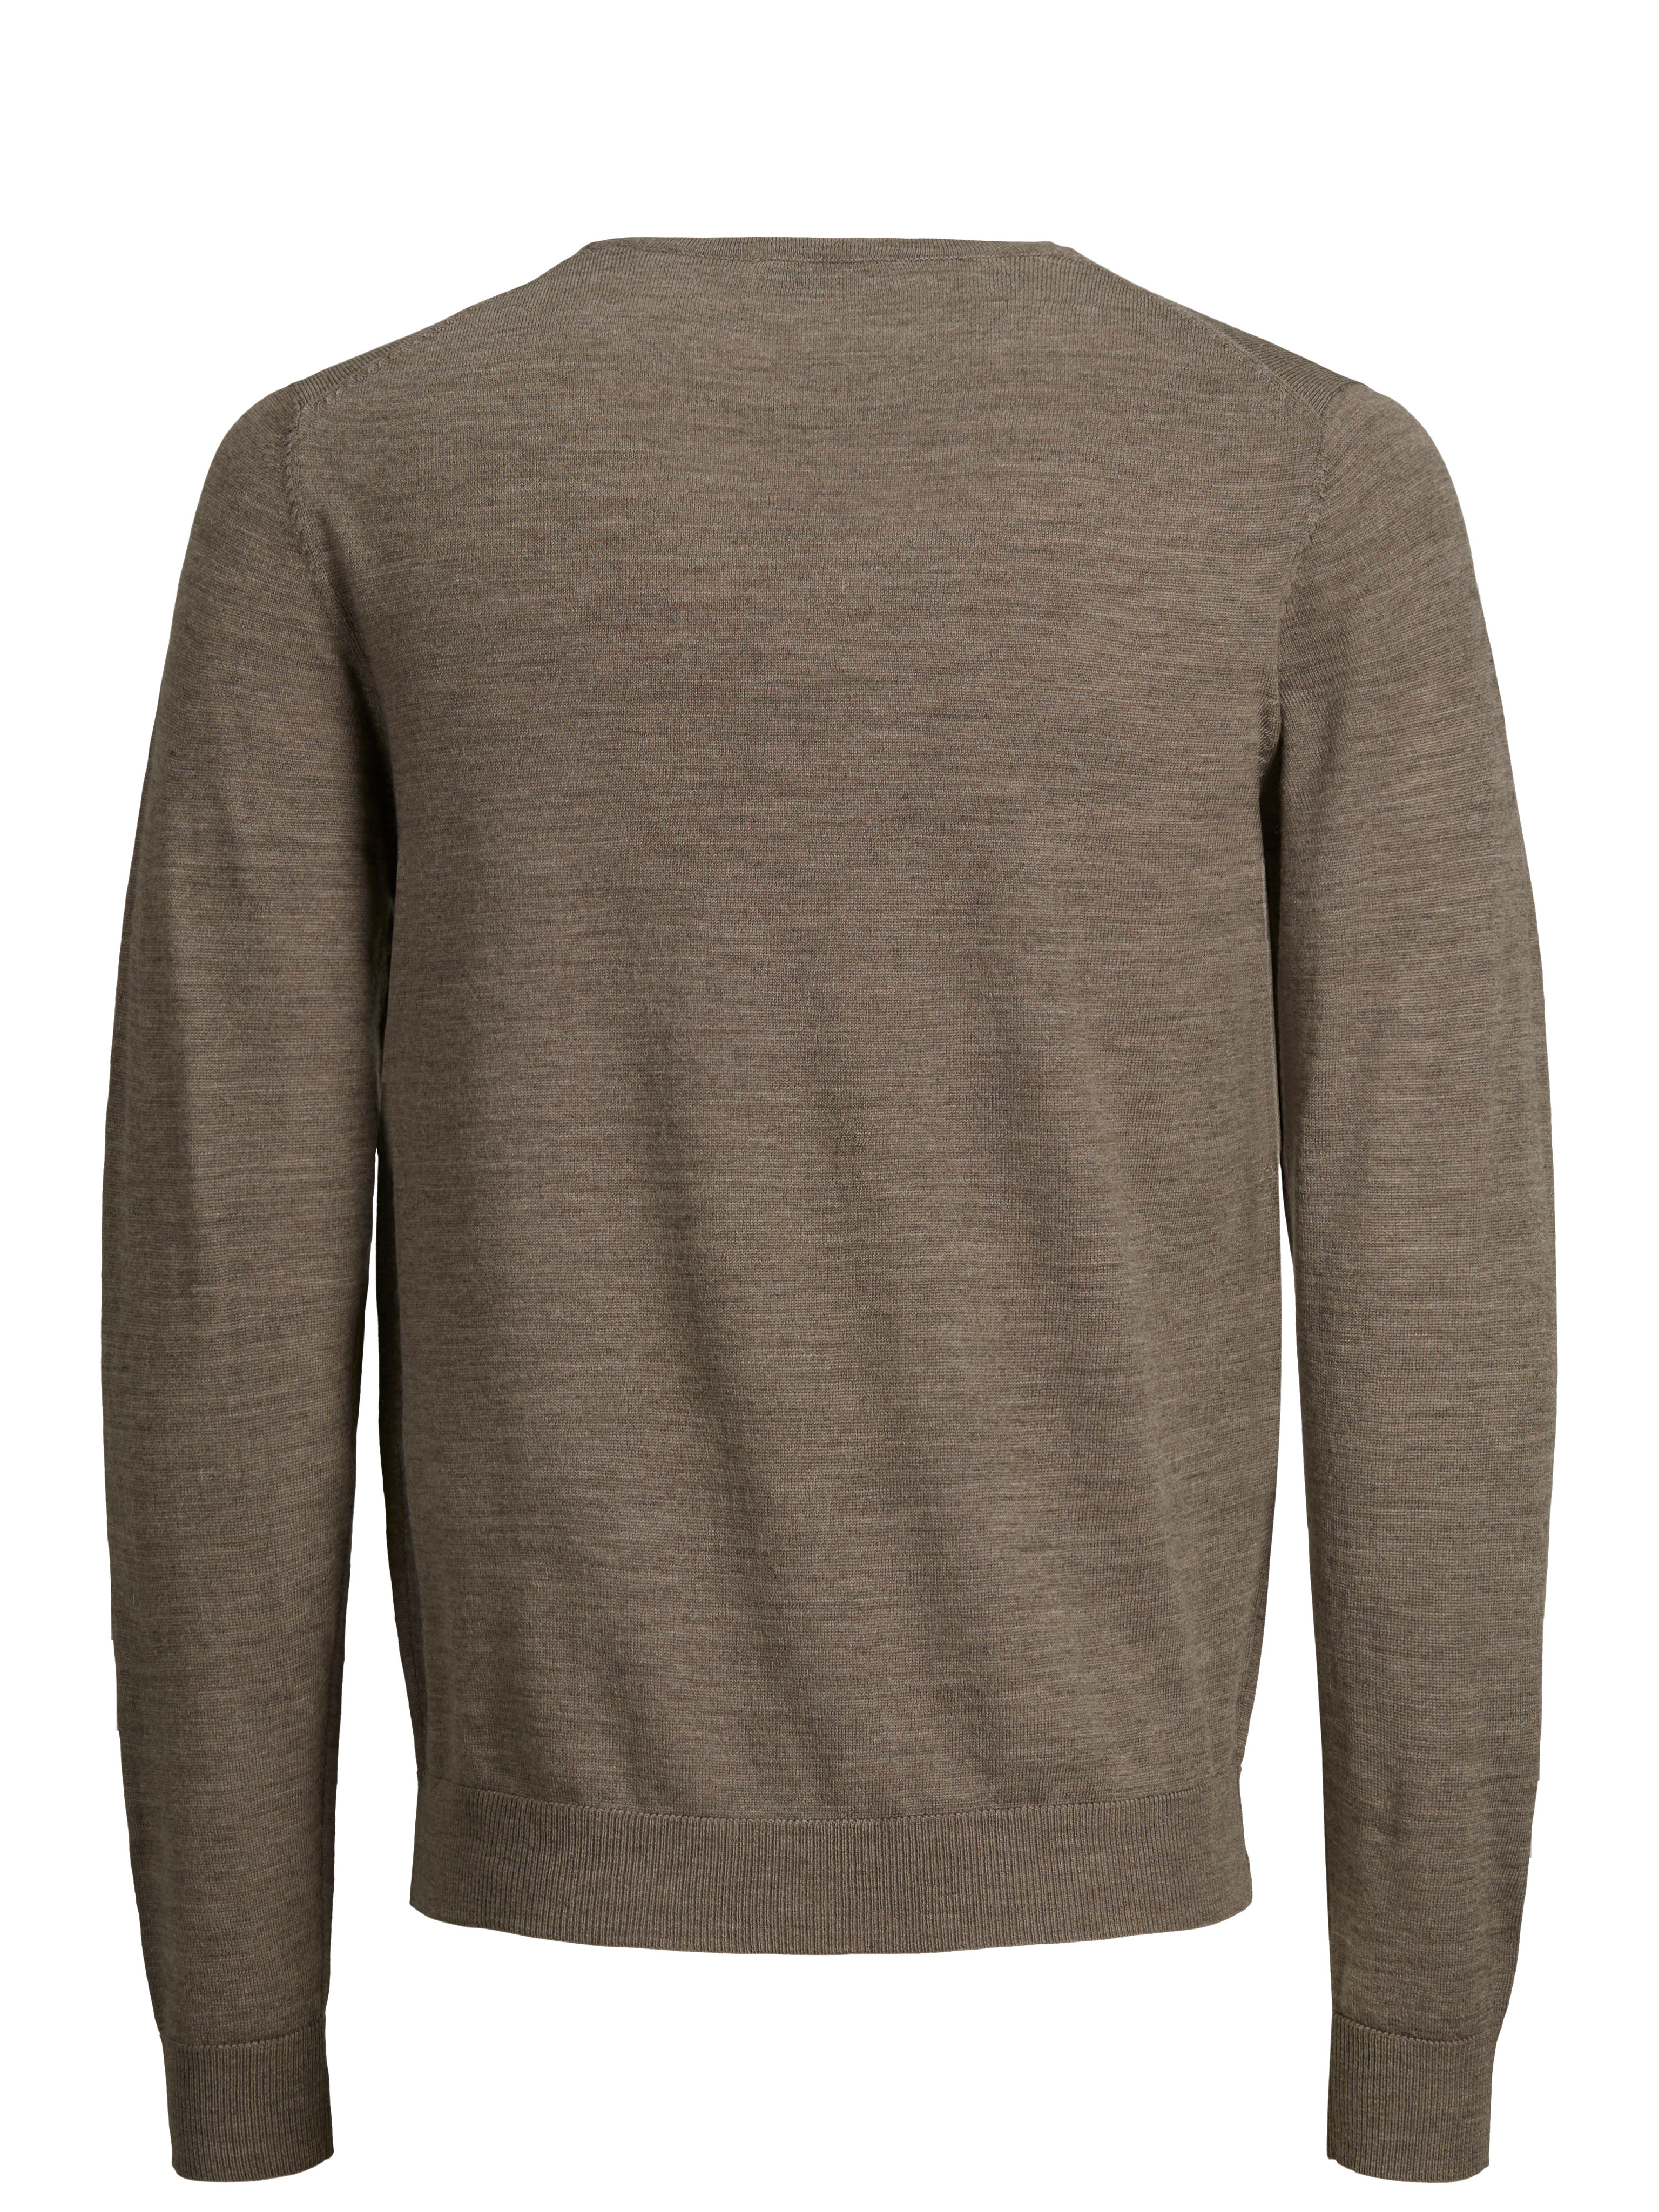 Men's knitted merino wool pullover, Beige, large image number 1